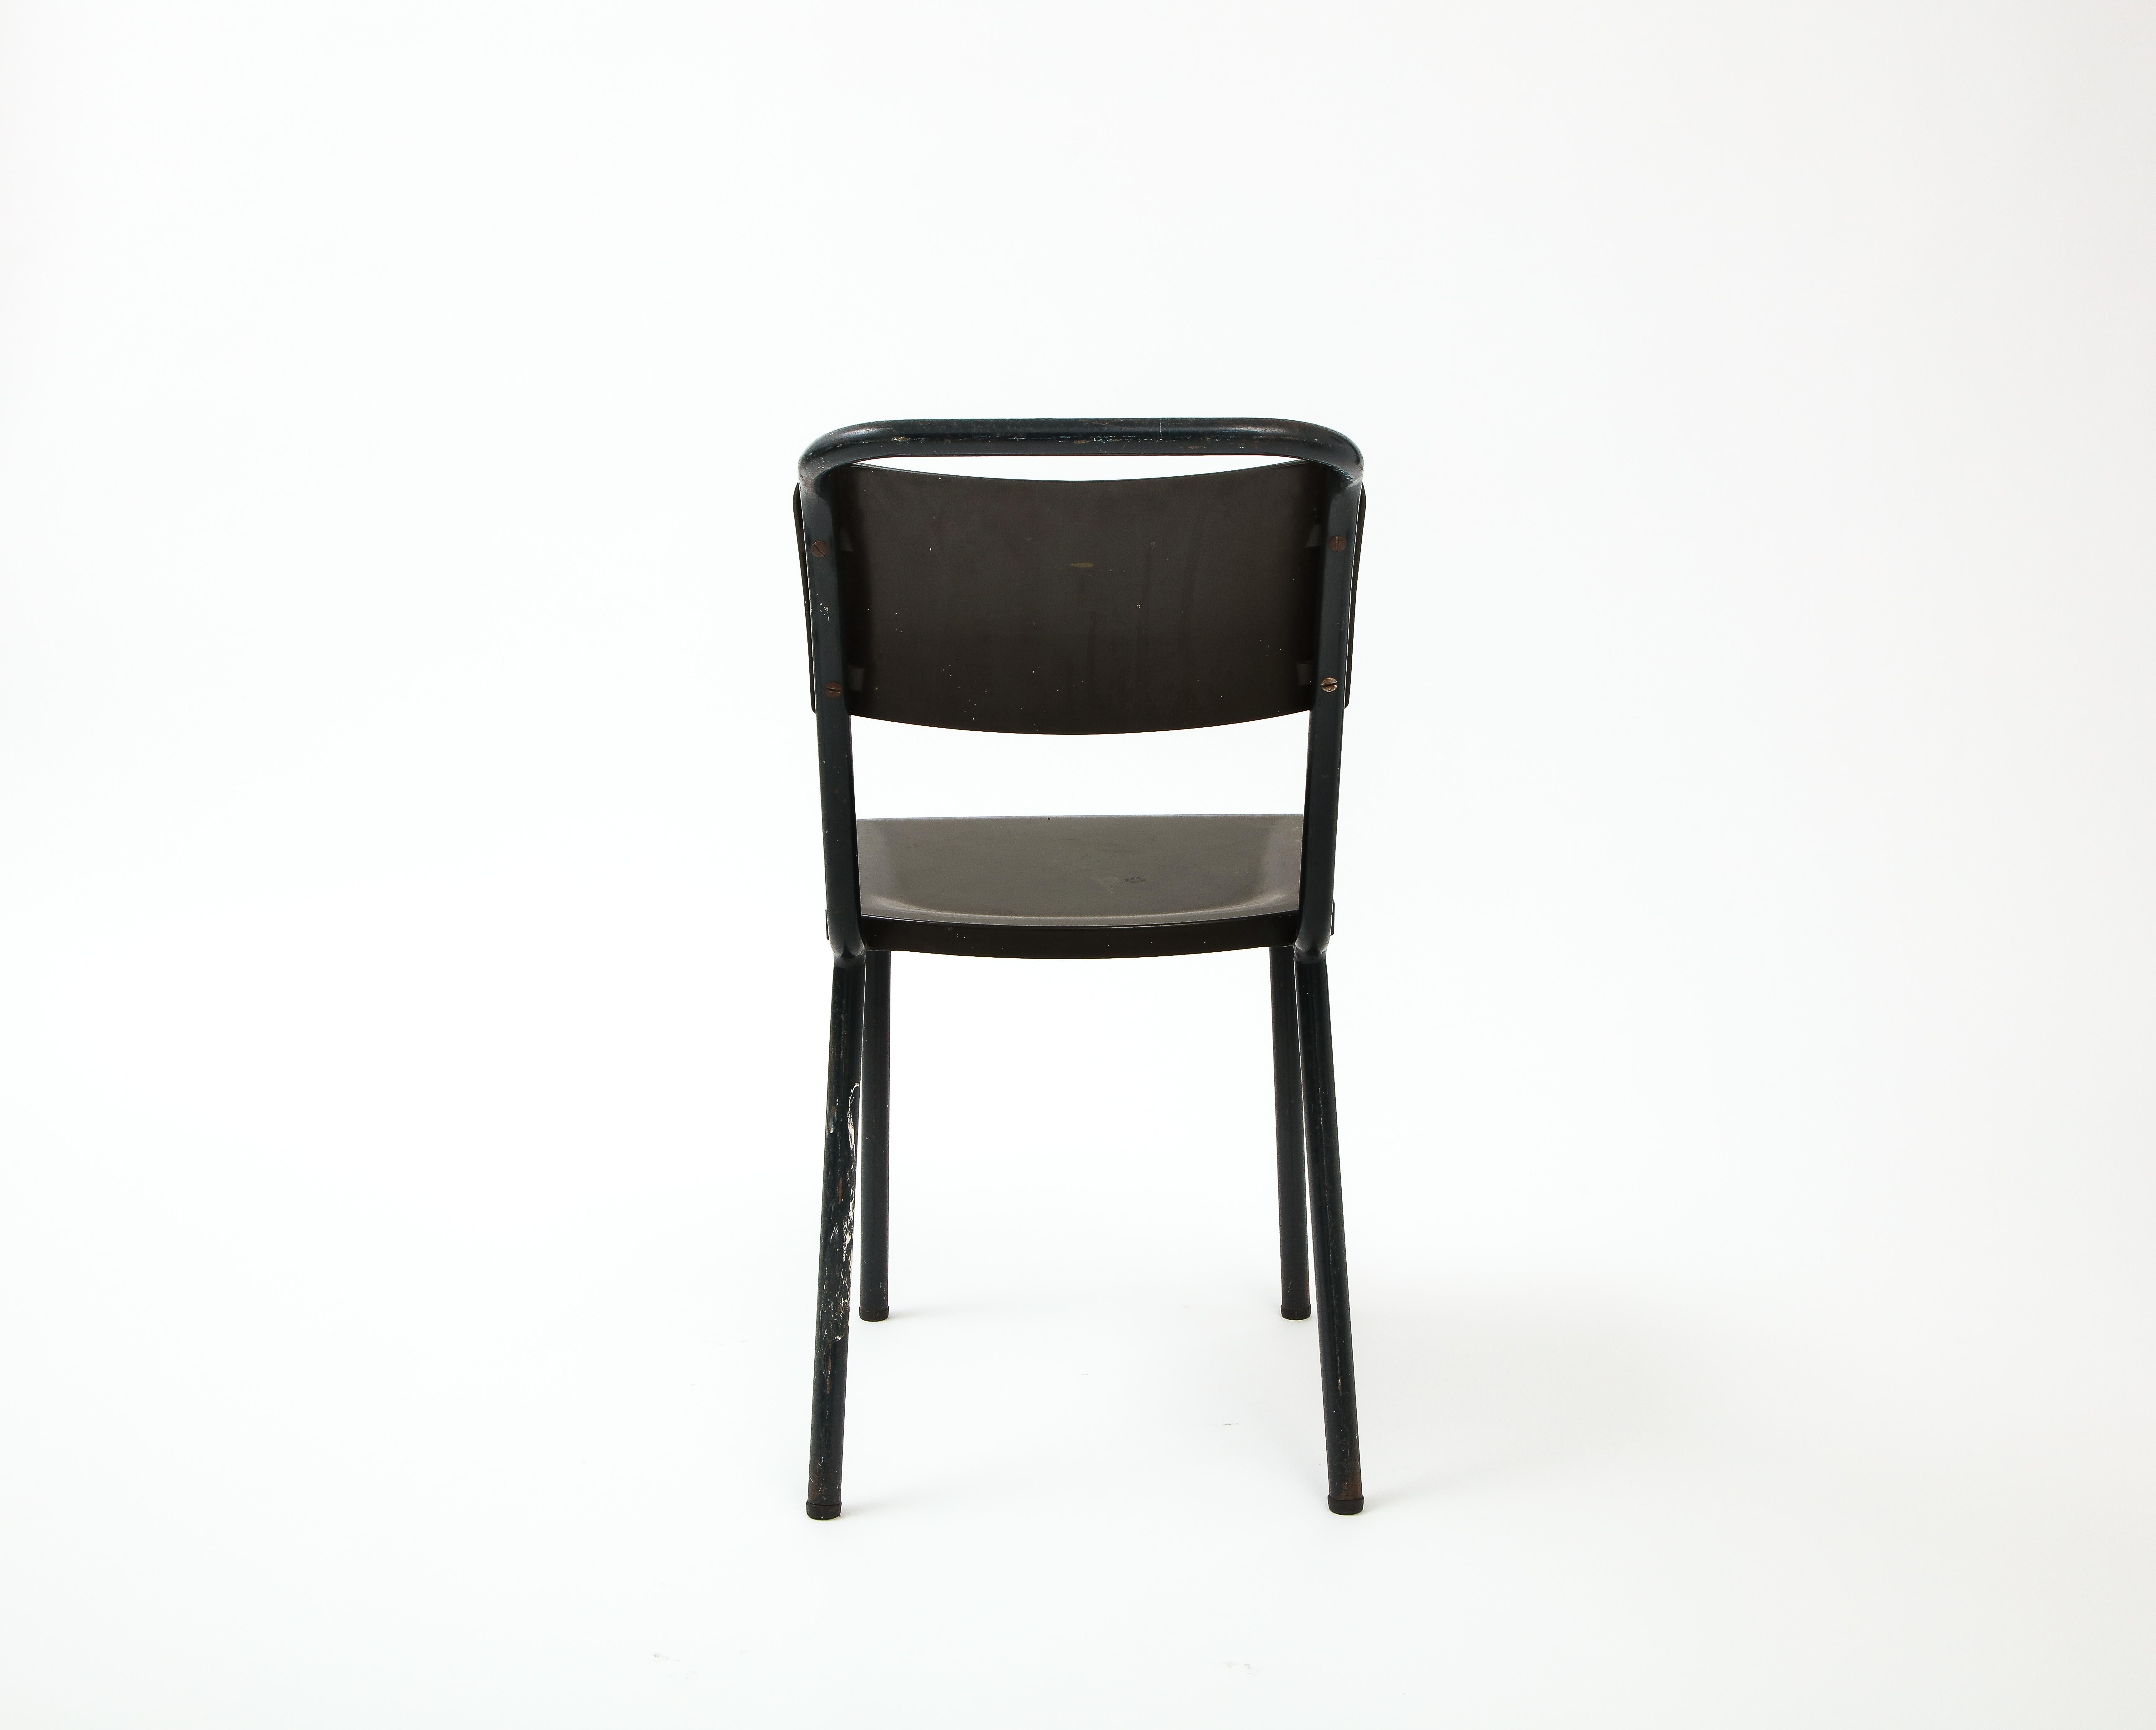 Single Industrial Side Chair in Style of Pierre Guariche, France 1950's For Sale 2